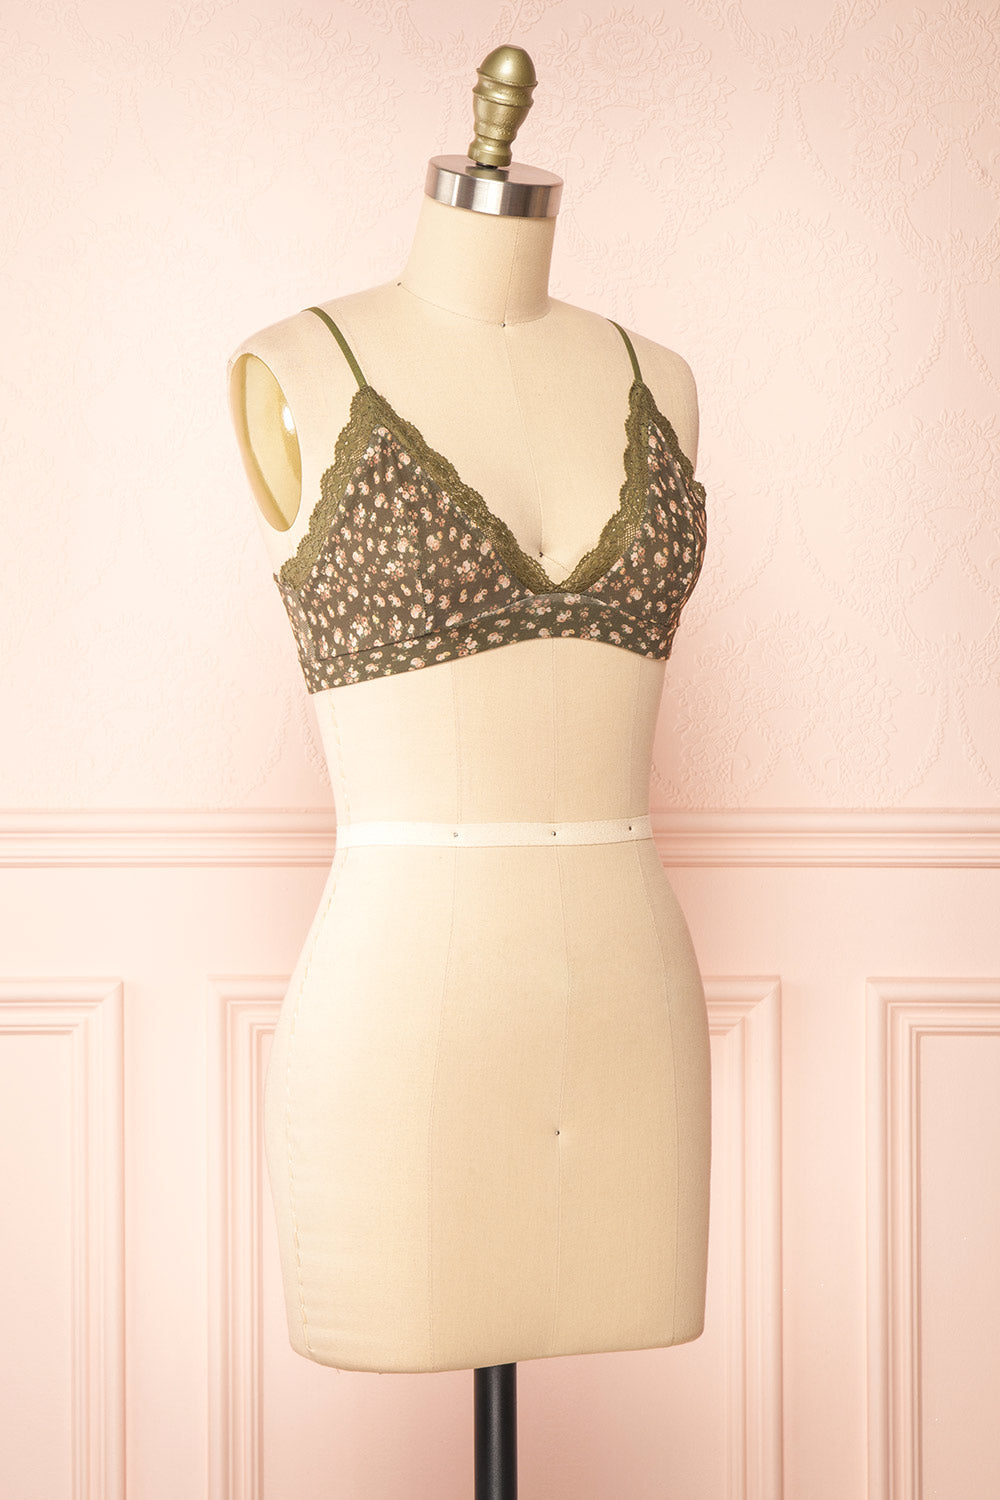 Distyle Green Floral Mesh Bralette w/ Lace | Boutique 1861 side view